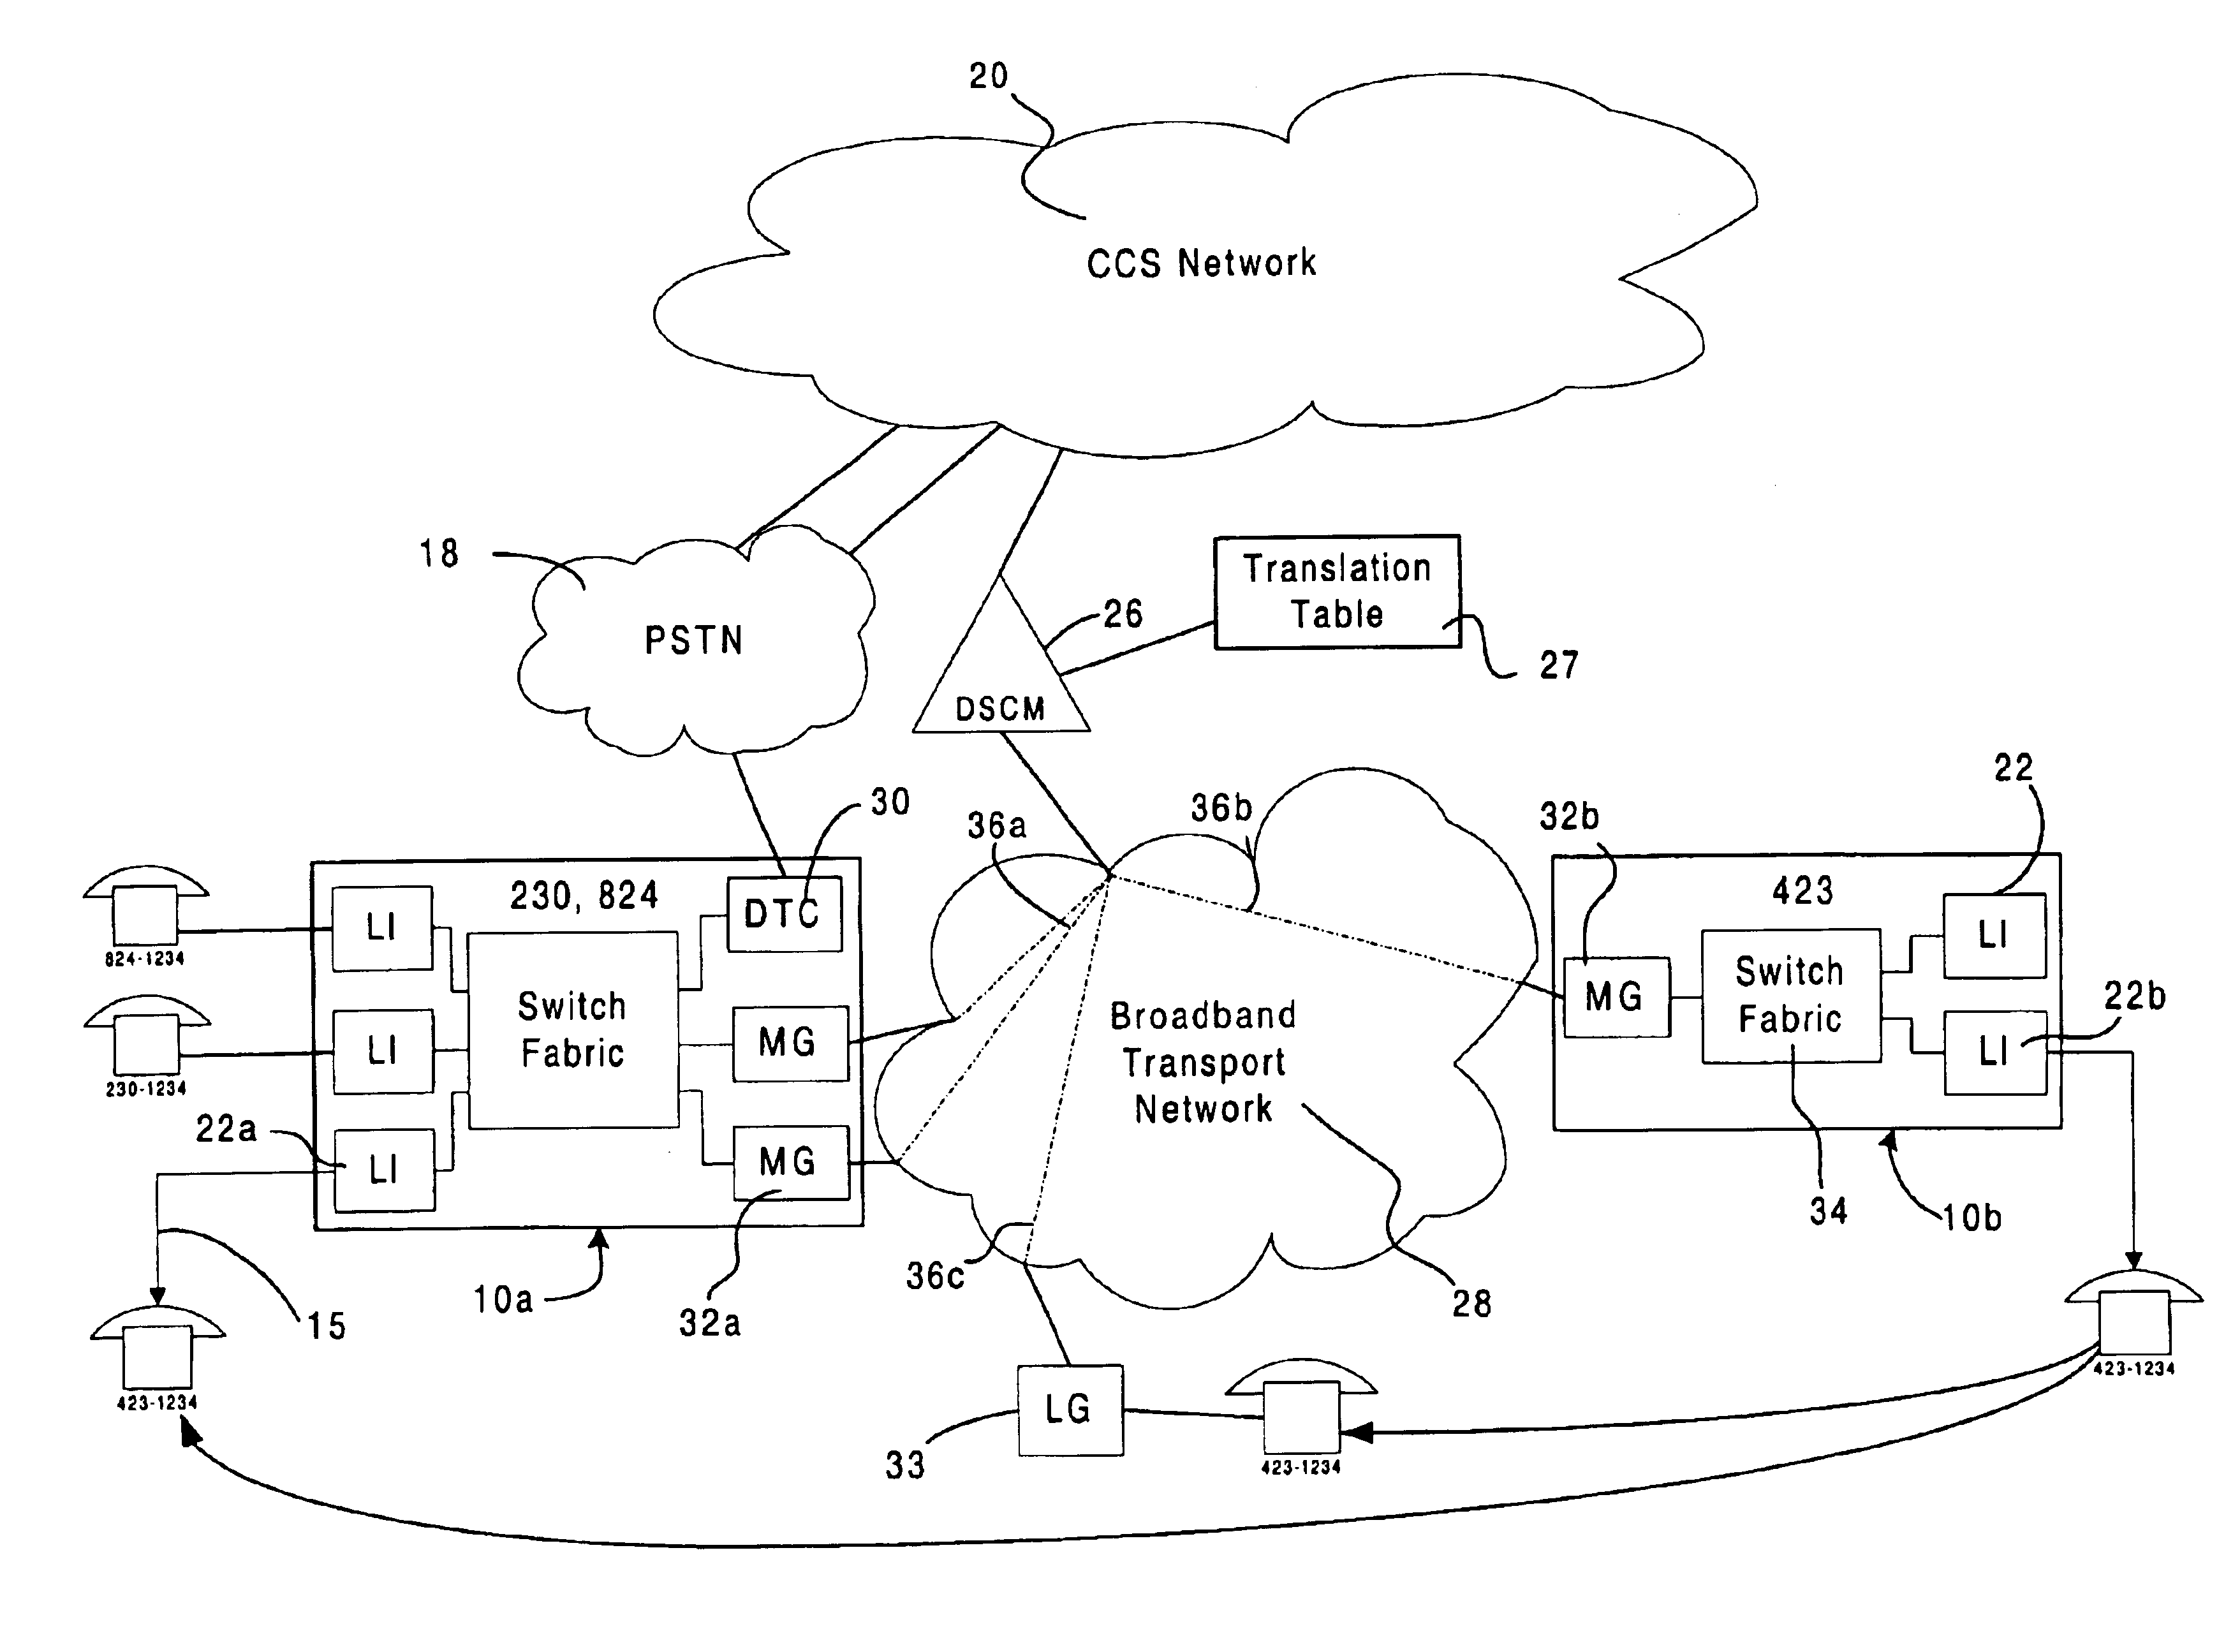 Method and apparatus enabling local number portability in telephone networks